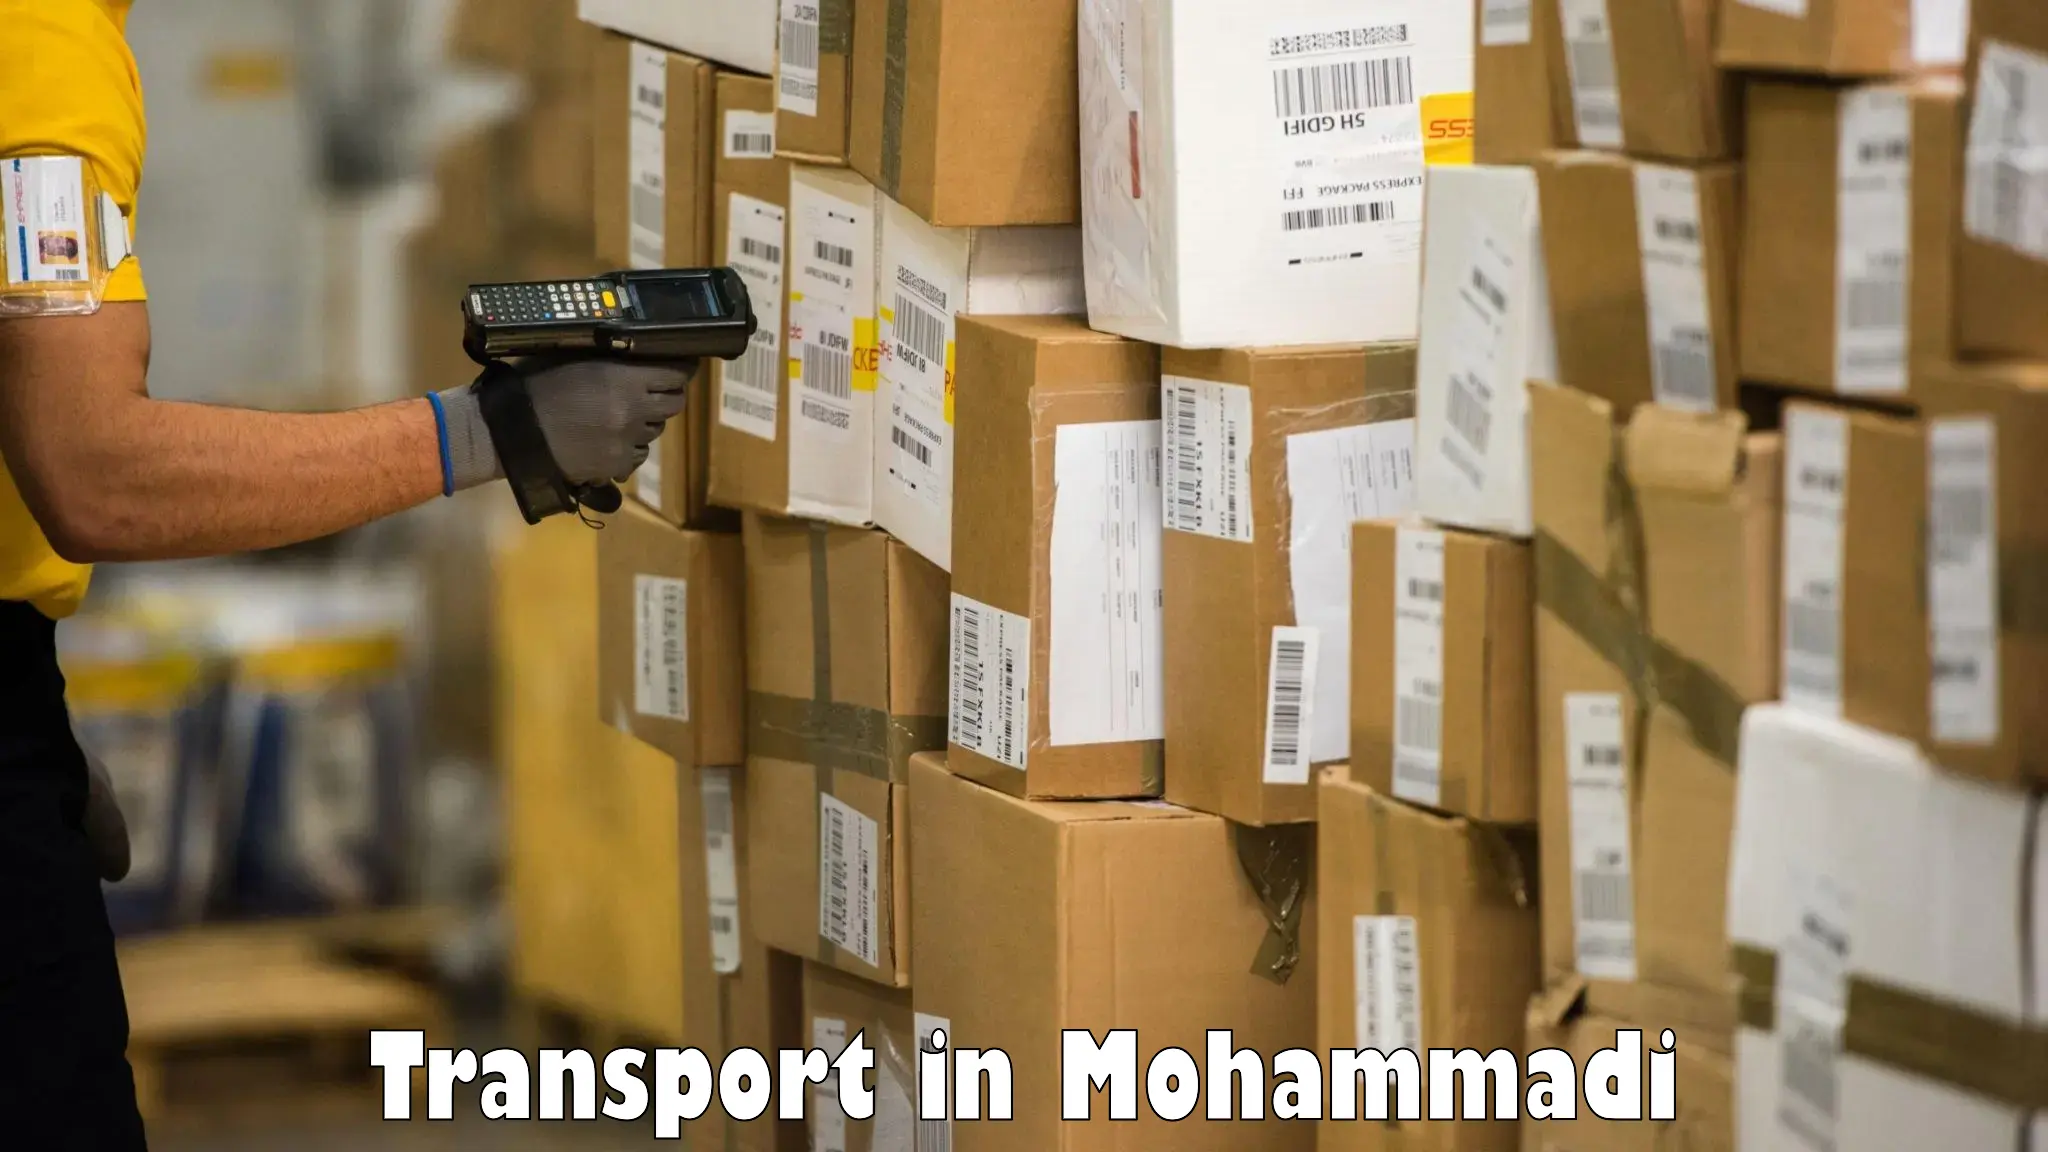 Express transport services in Mohammadi